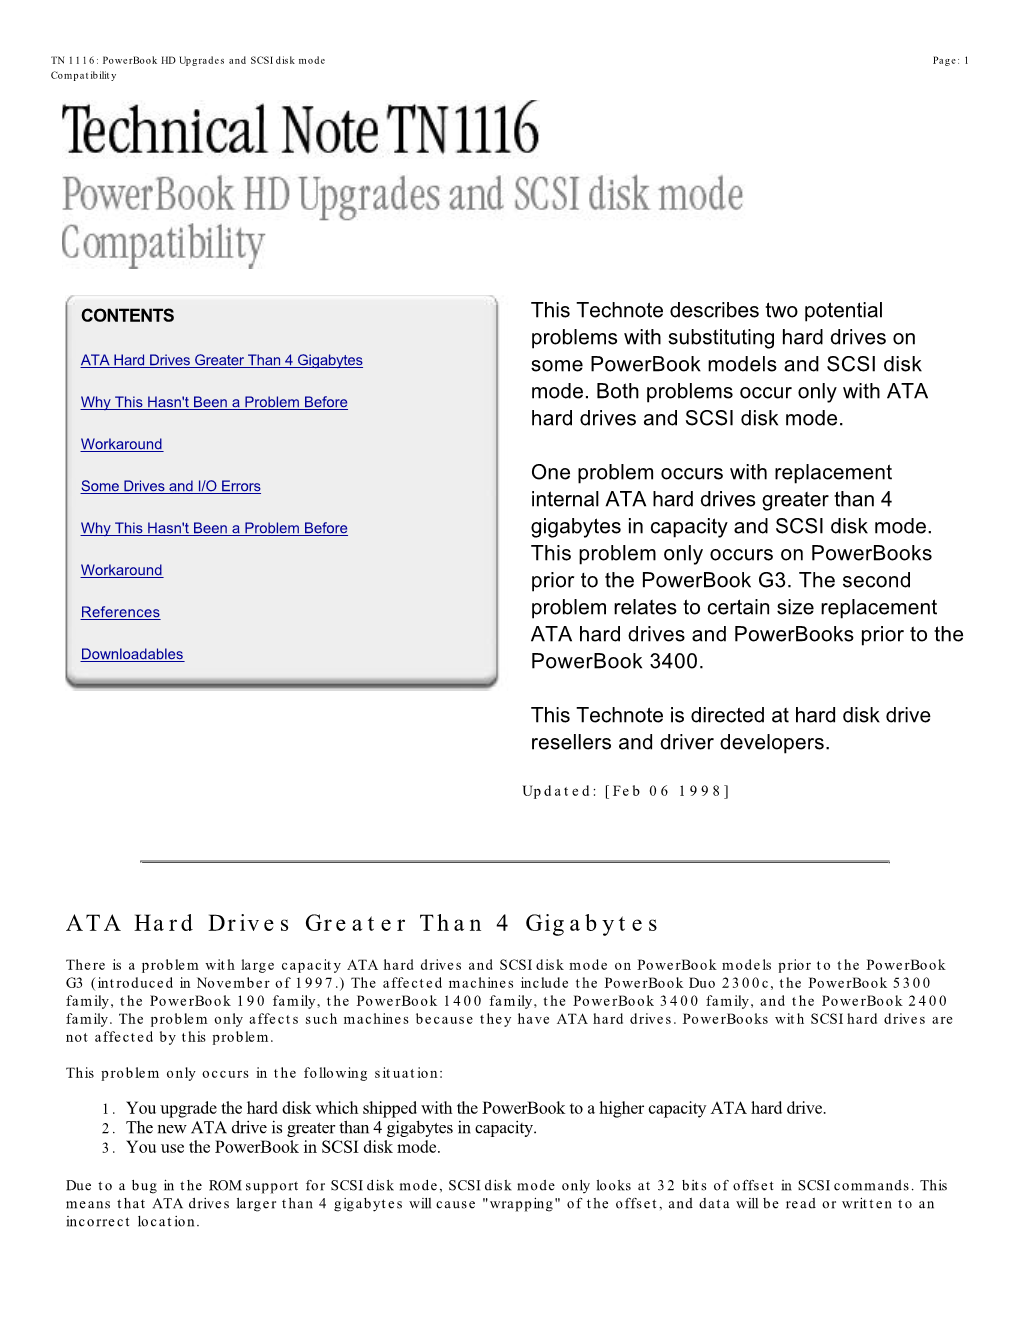 ATA Hard Drives Greater Than 4 Gigabytes Some Powerbook Models and SCSI Disk Mode